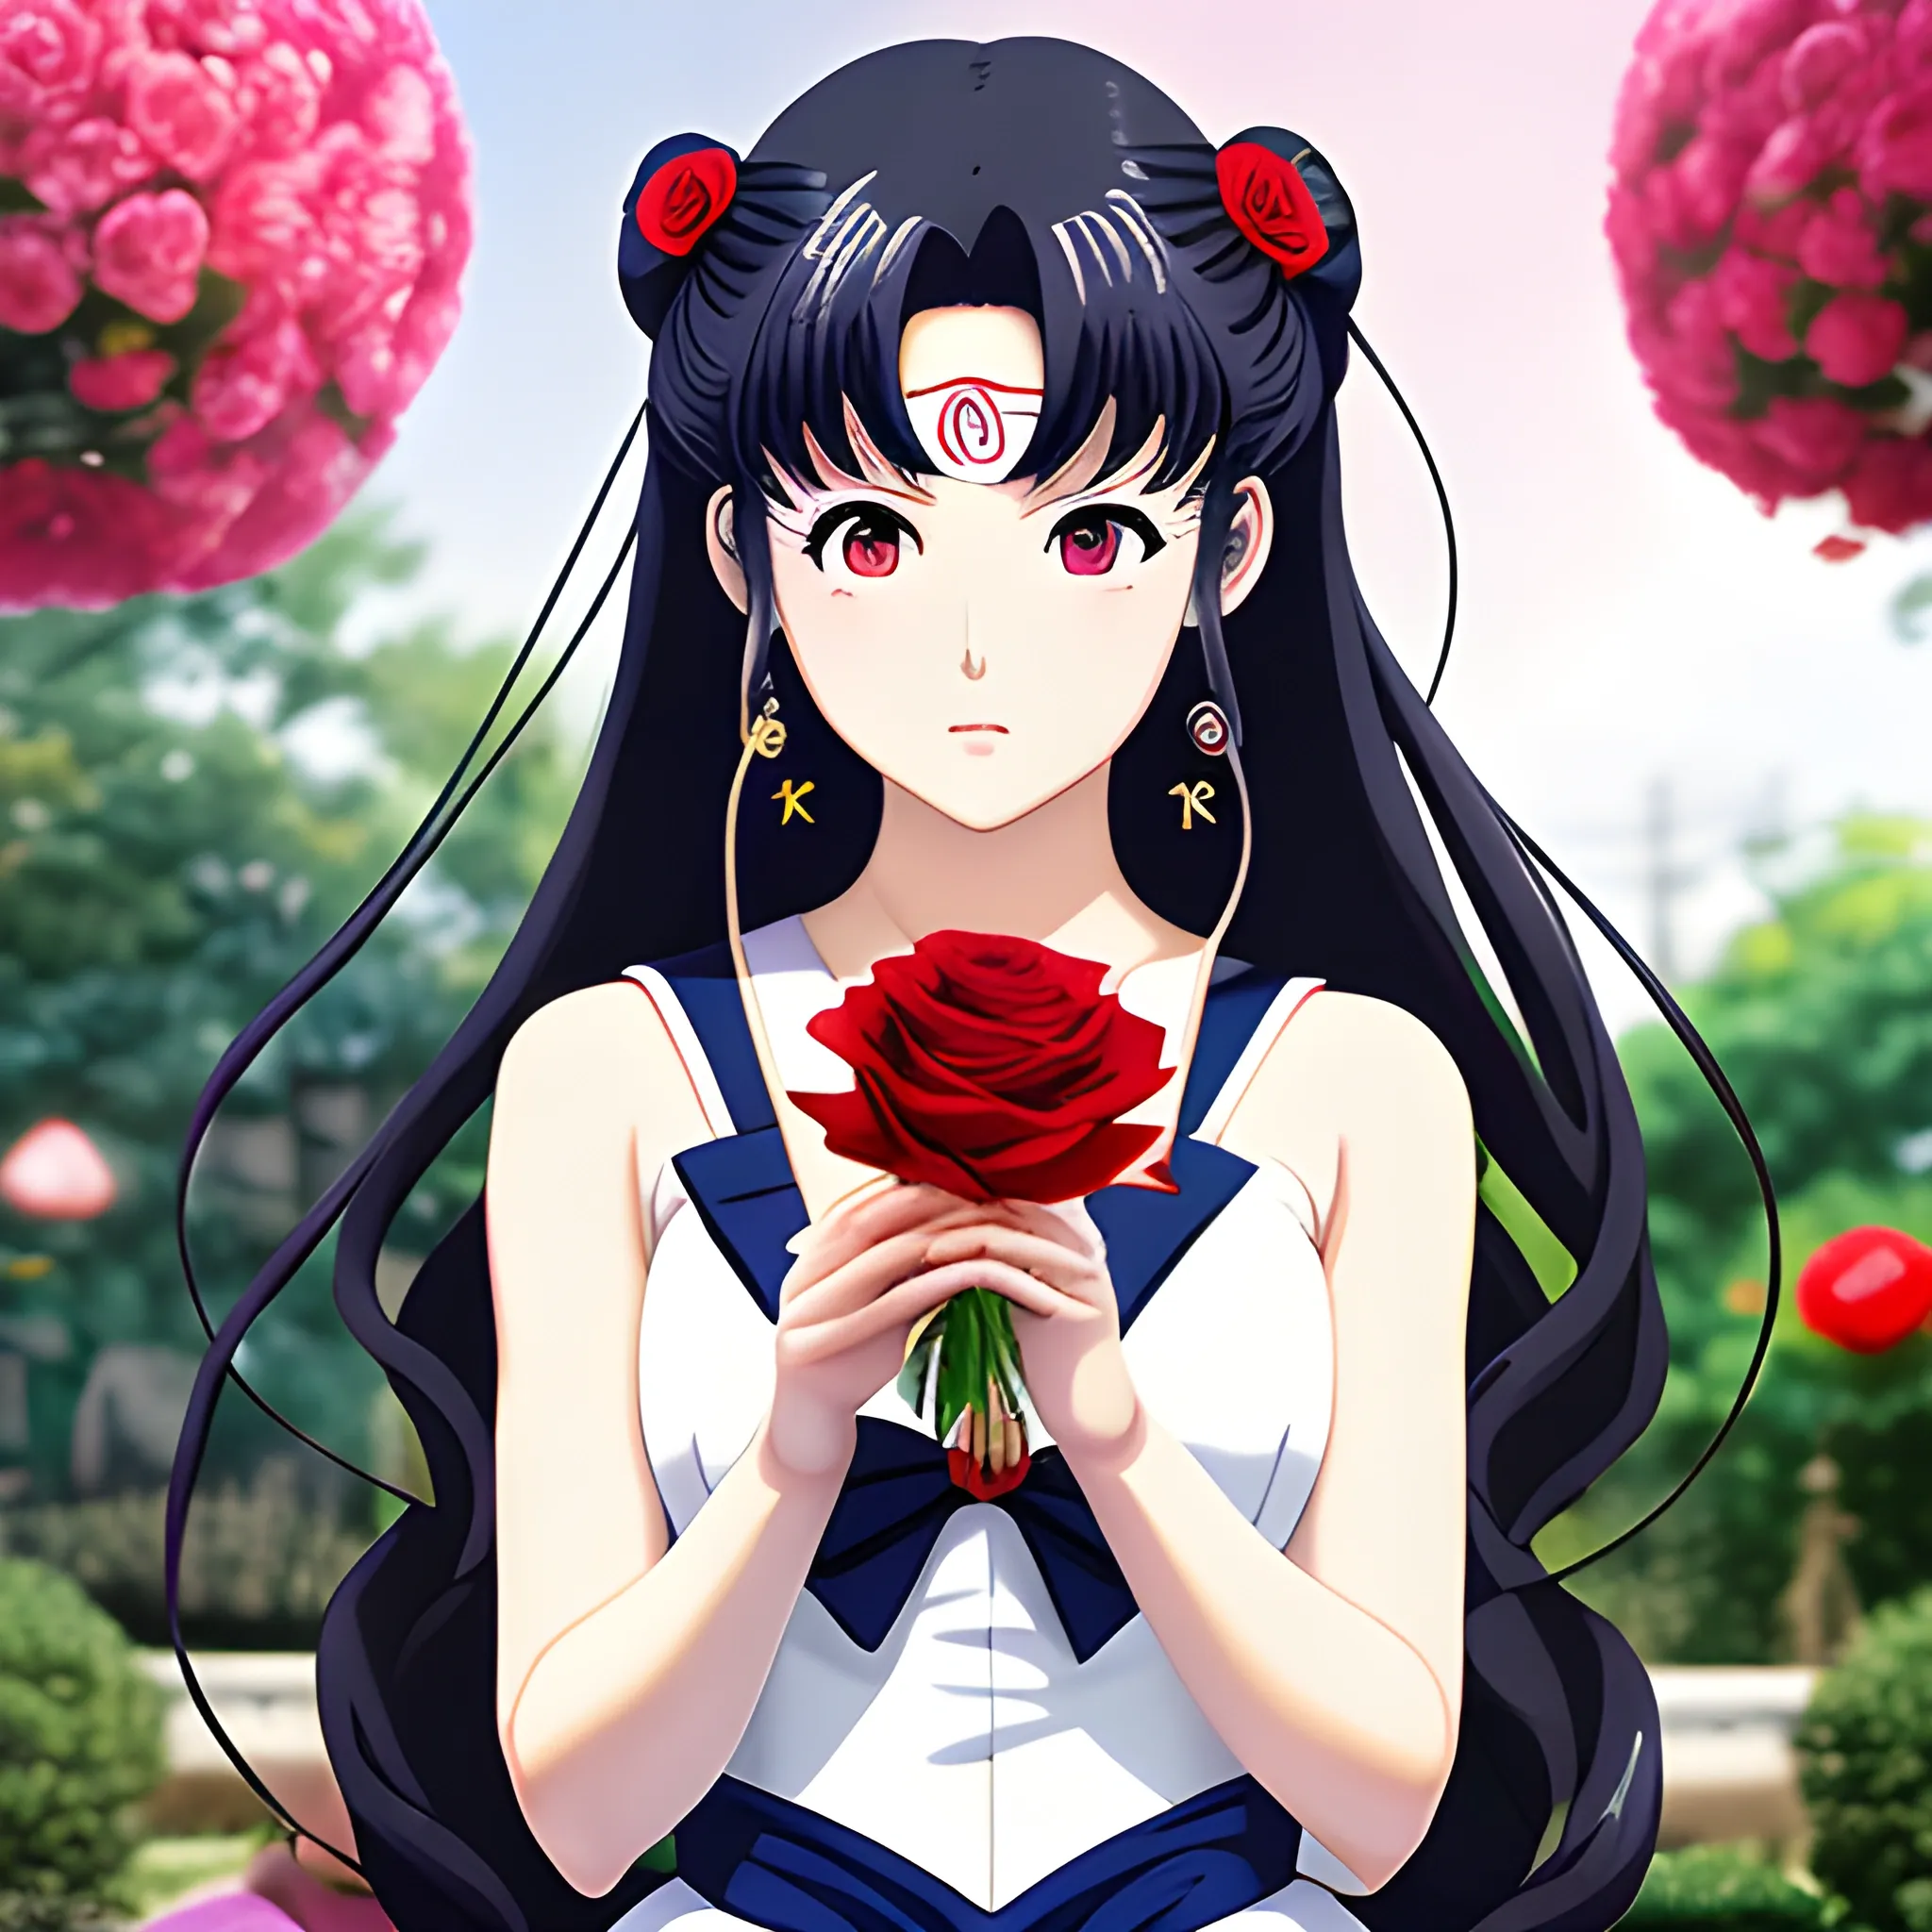 Japanese anime Sailor Moon, sideways, Garden background, wavy long black hair, holding a red rose,Eyes on the rose,Smelling the roses,Stand by the pool,Mirror reflection in wateraward,face parts, face details like eyes, lips etc,winning studio photography, professional colour grading, soft shadows, no contrast, clean sharp focus, Cartoon, anime